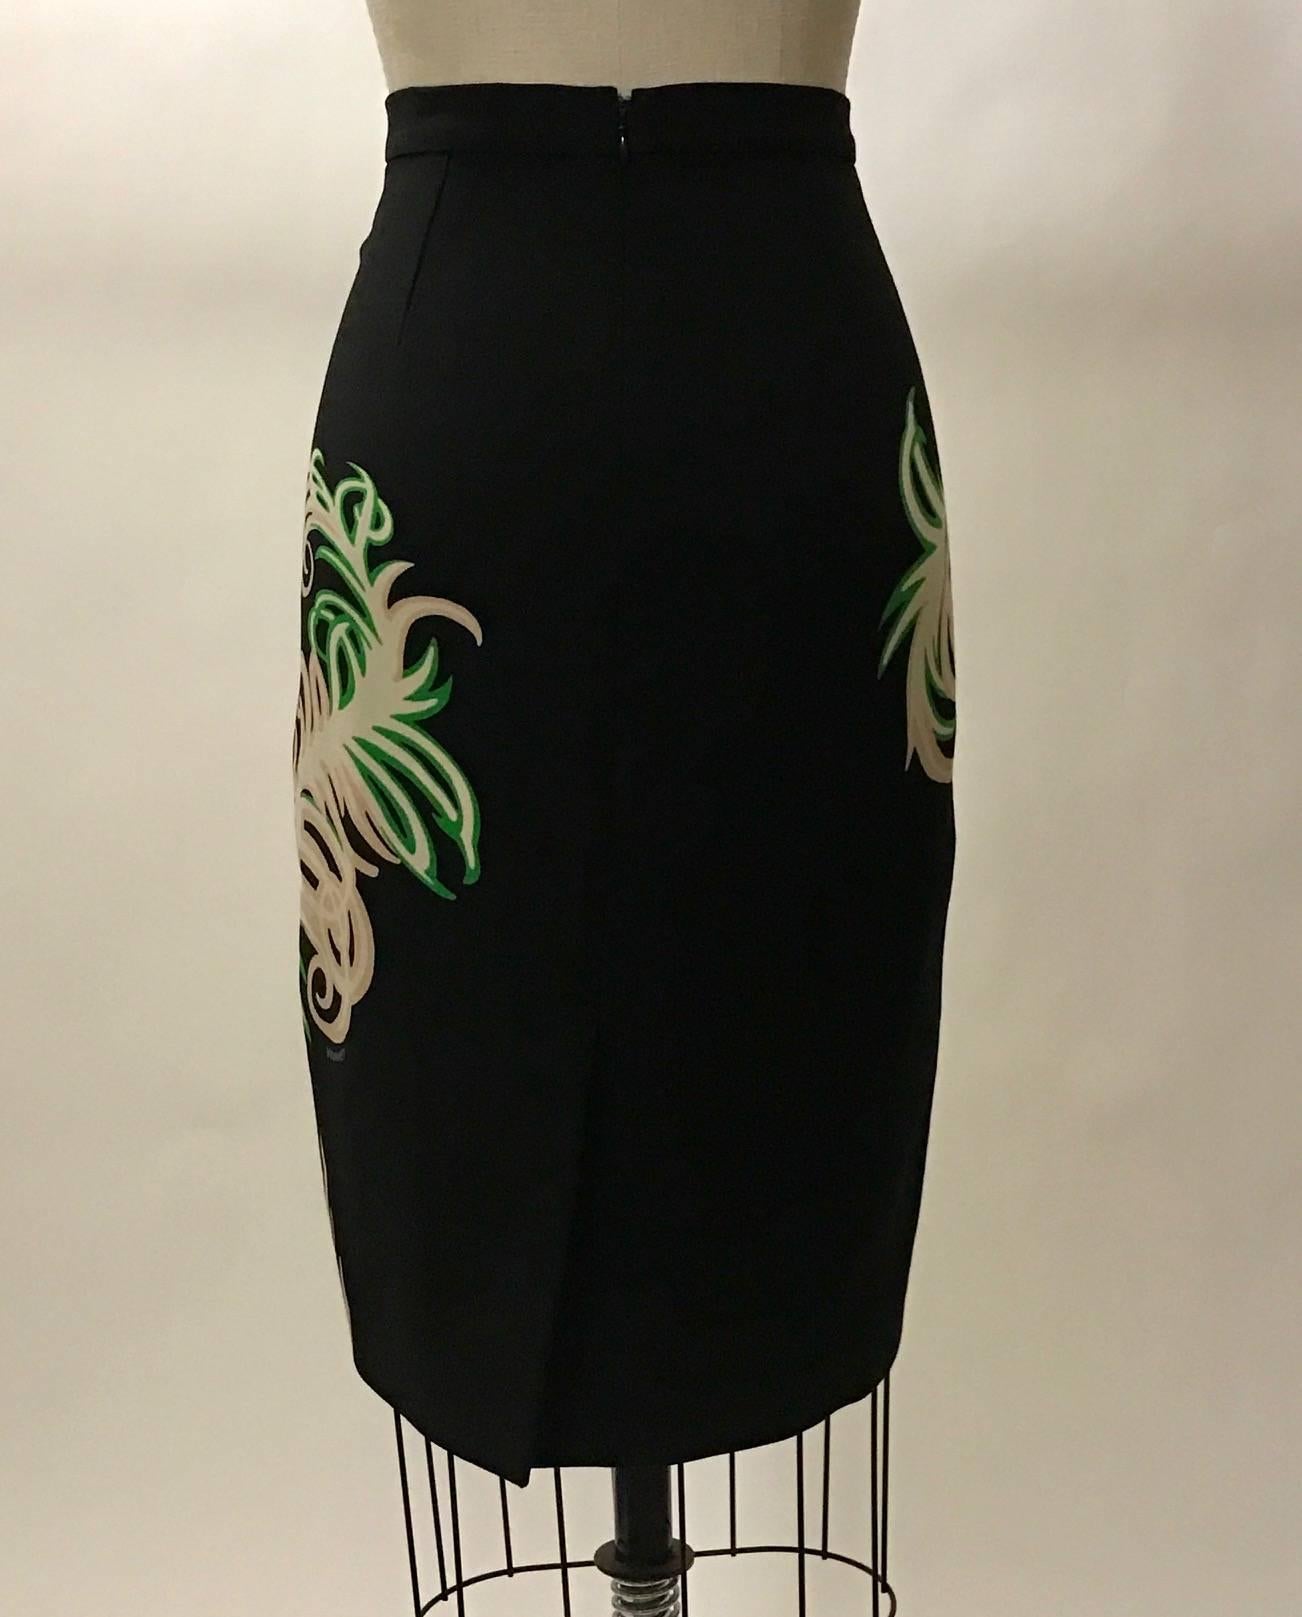 Vionnet recent collection black pencil skirt with cream, pink, and green feather print. Back slit and back zip with hook and eye.

82% virgin wool, 18% nylon polyamide.

Made in Italy.

Size IT 40, approximate US 4. Runs slightly small, see